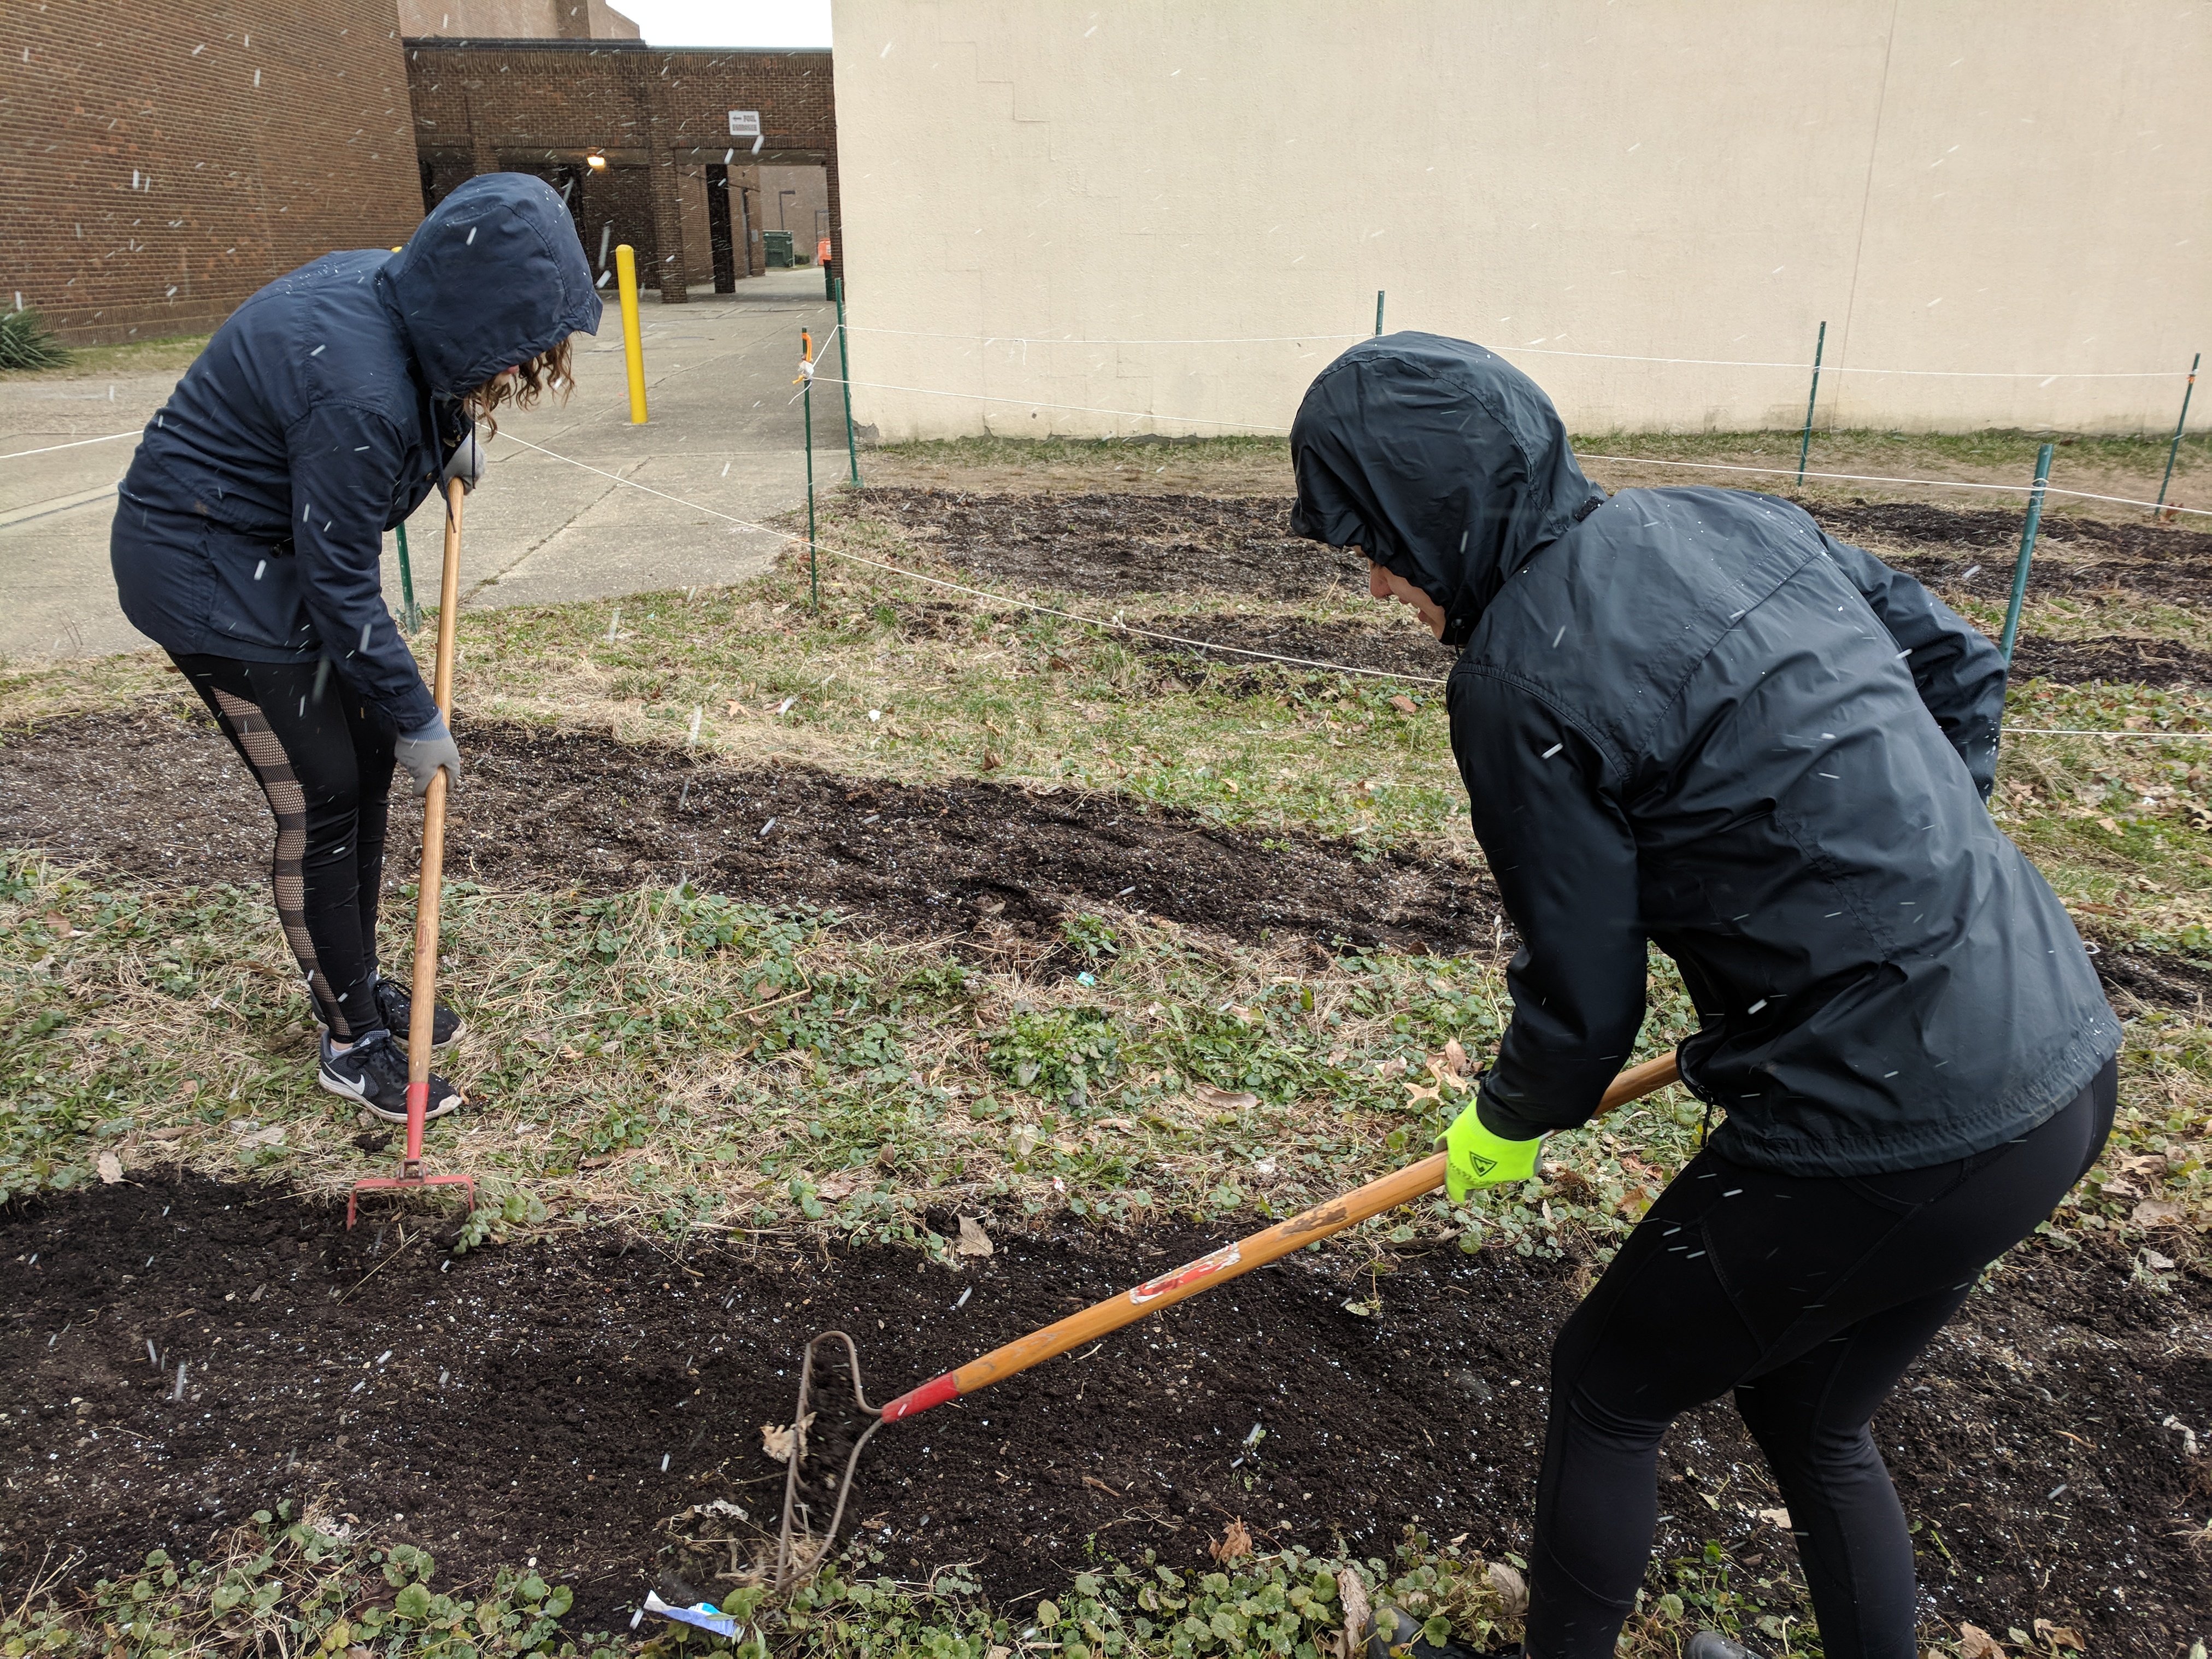 Students rake the soil to clear the debris to the sides of the beds.